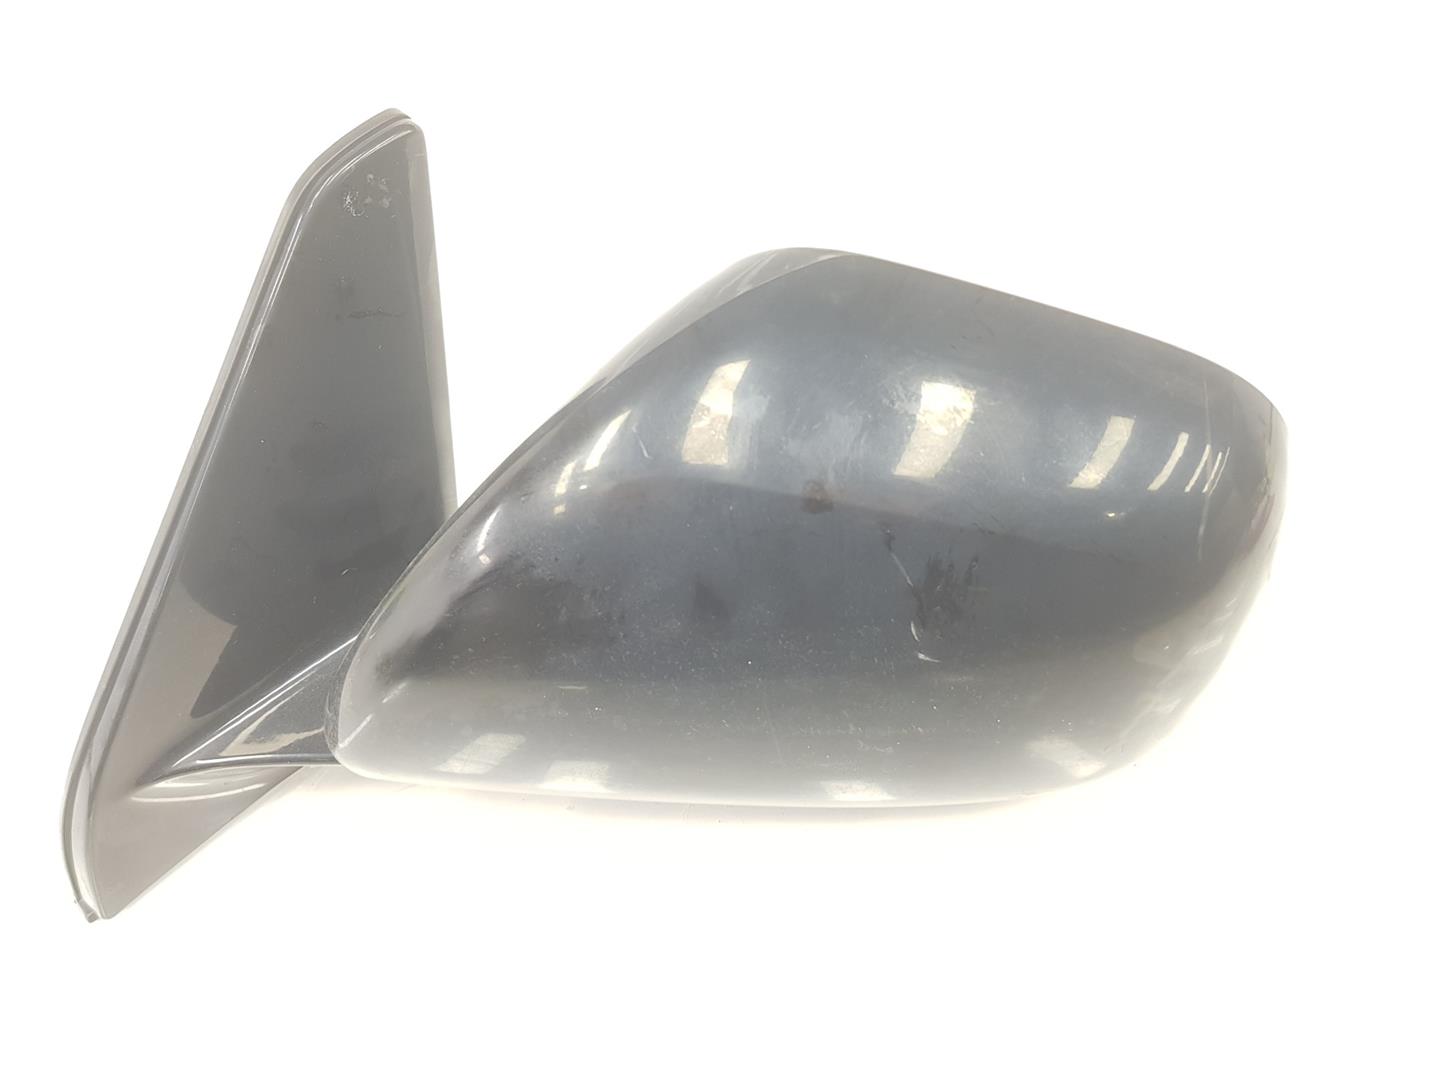 TOYOTA Land Cruiser 70 Series (1984-2024) Left Side Wing Mirror 879406A190C0, 879406A190C0, COLORNEGROONYX202 23800149